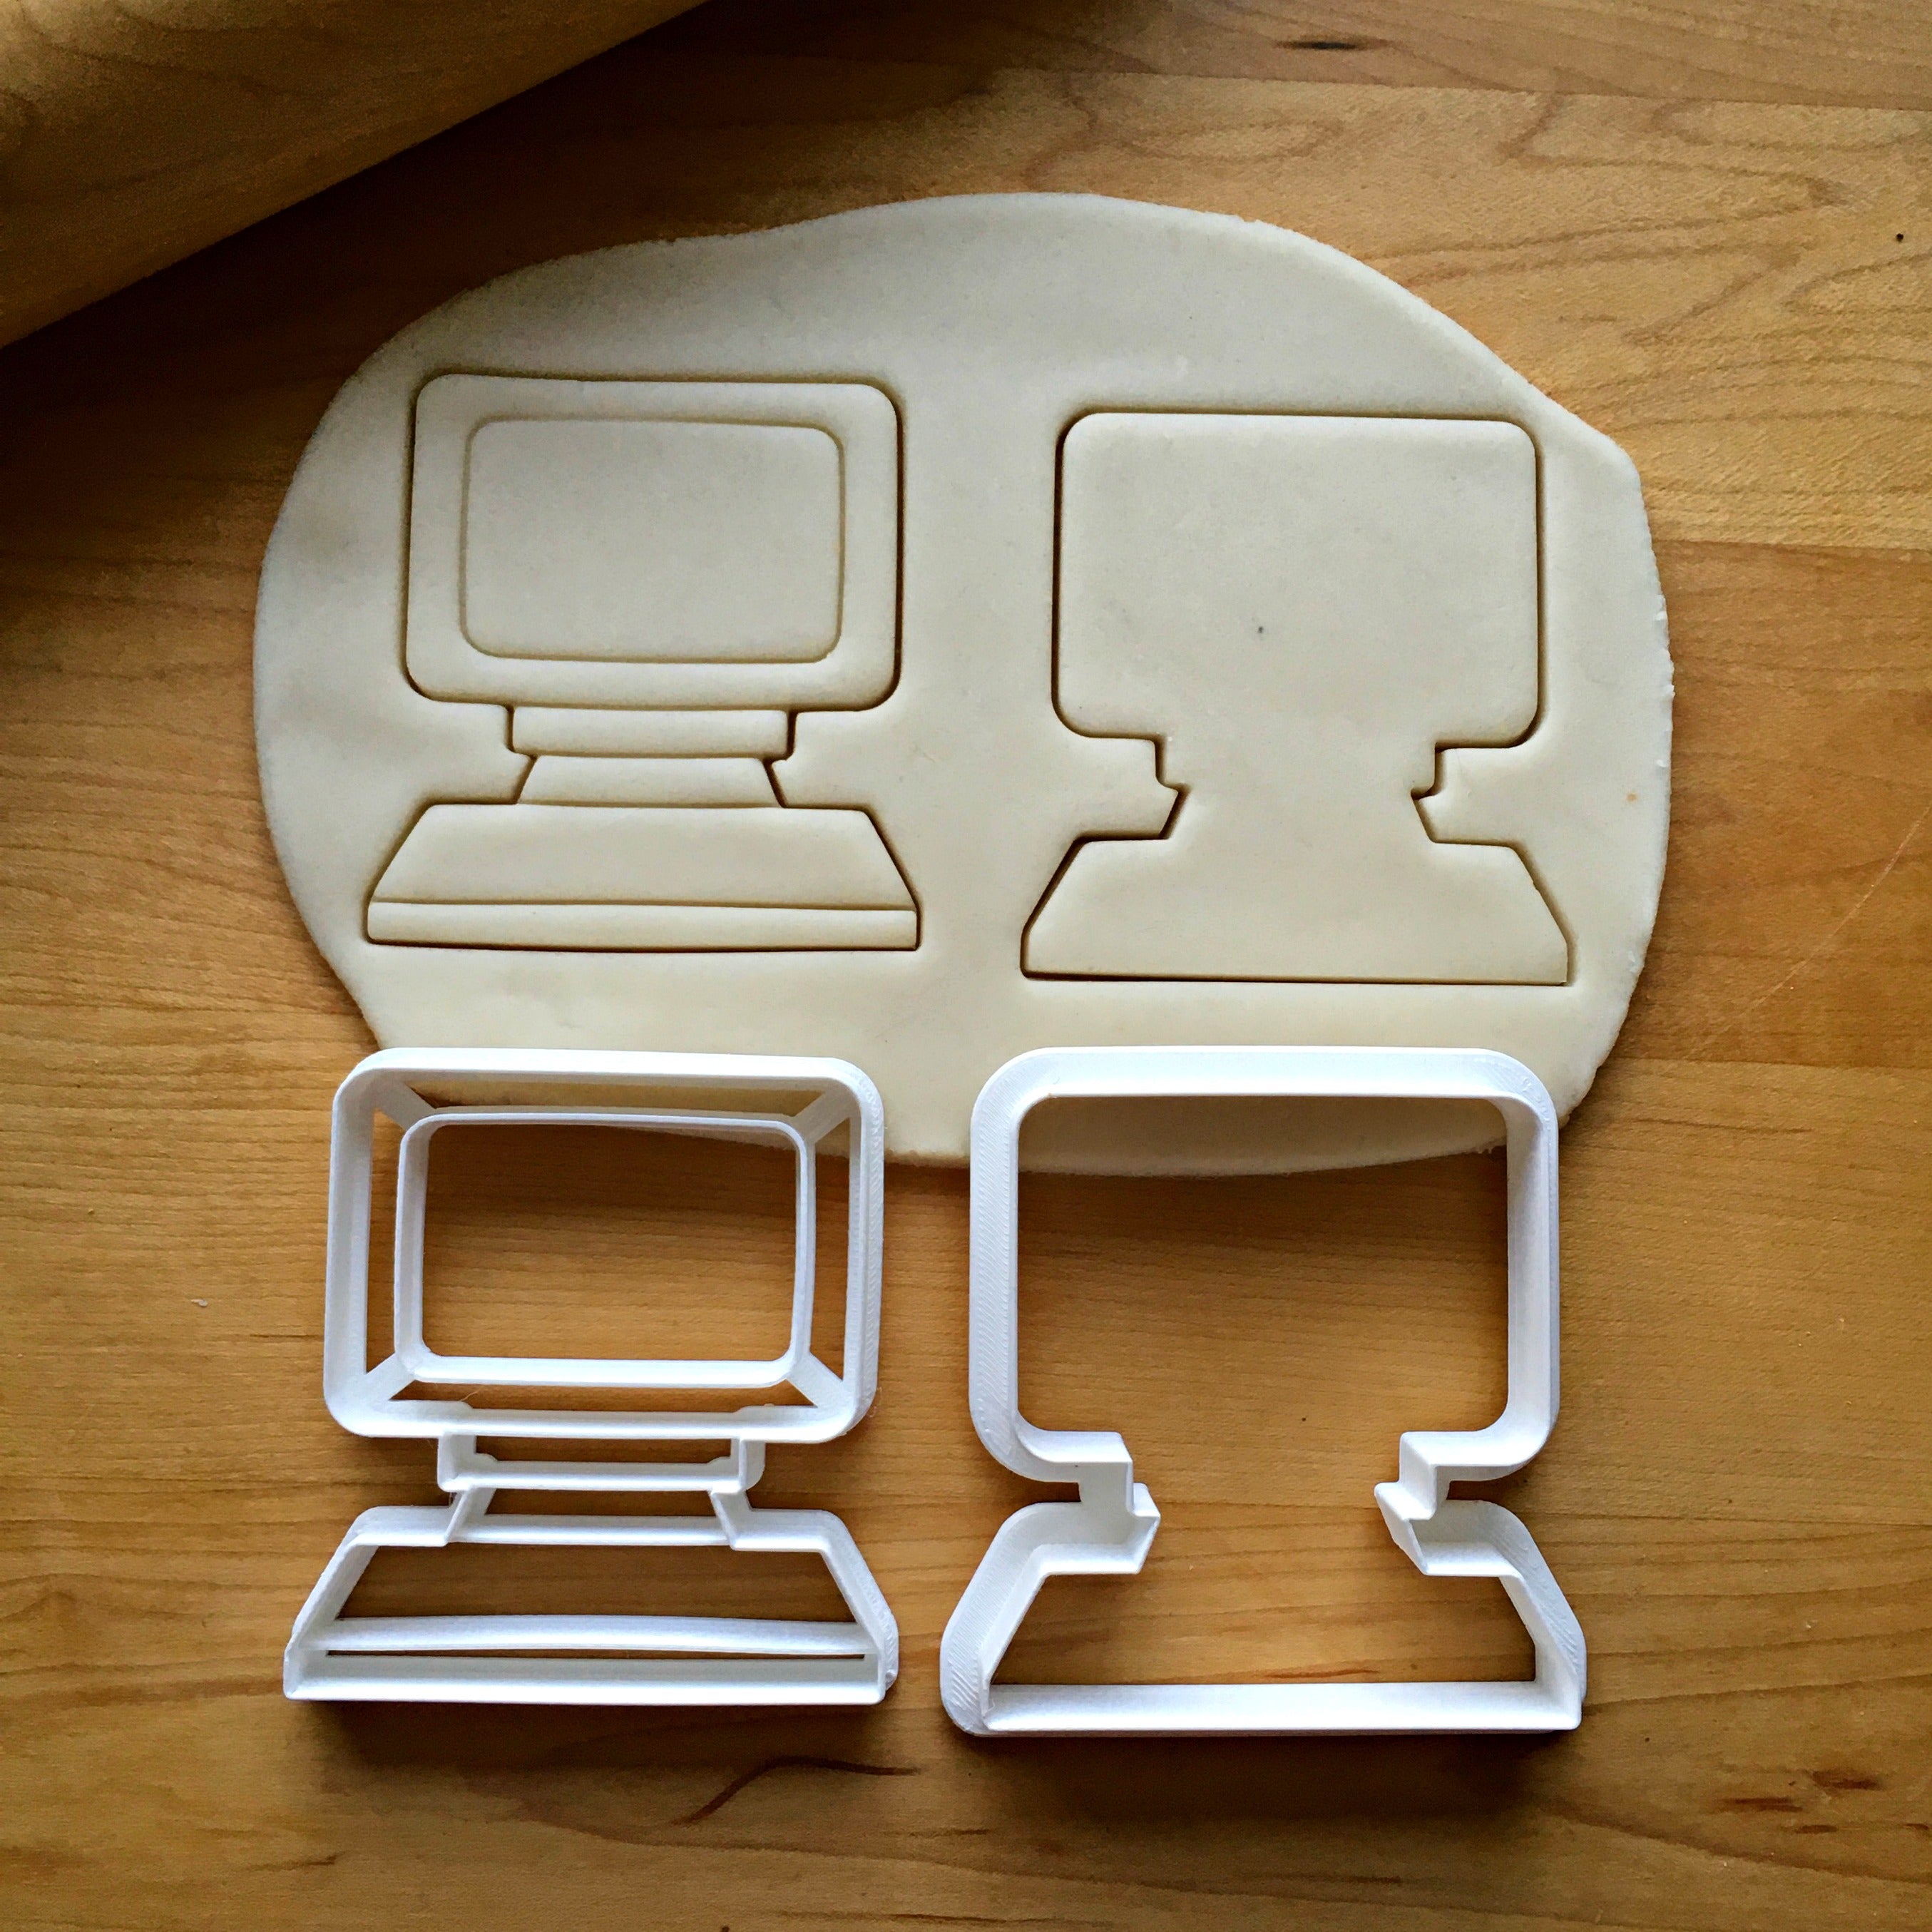 Set of 2 Computer Cookie Cutters/Dishwasher Safe